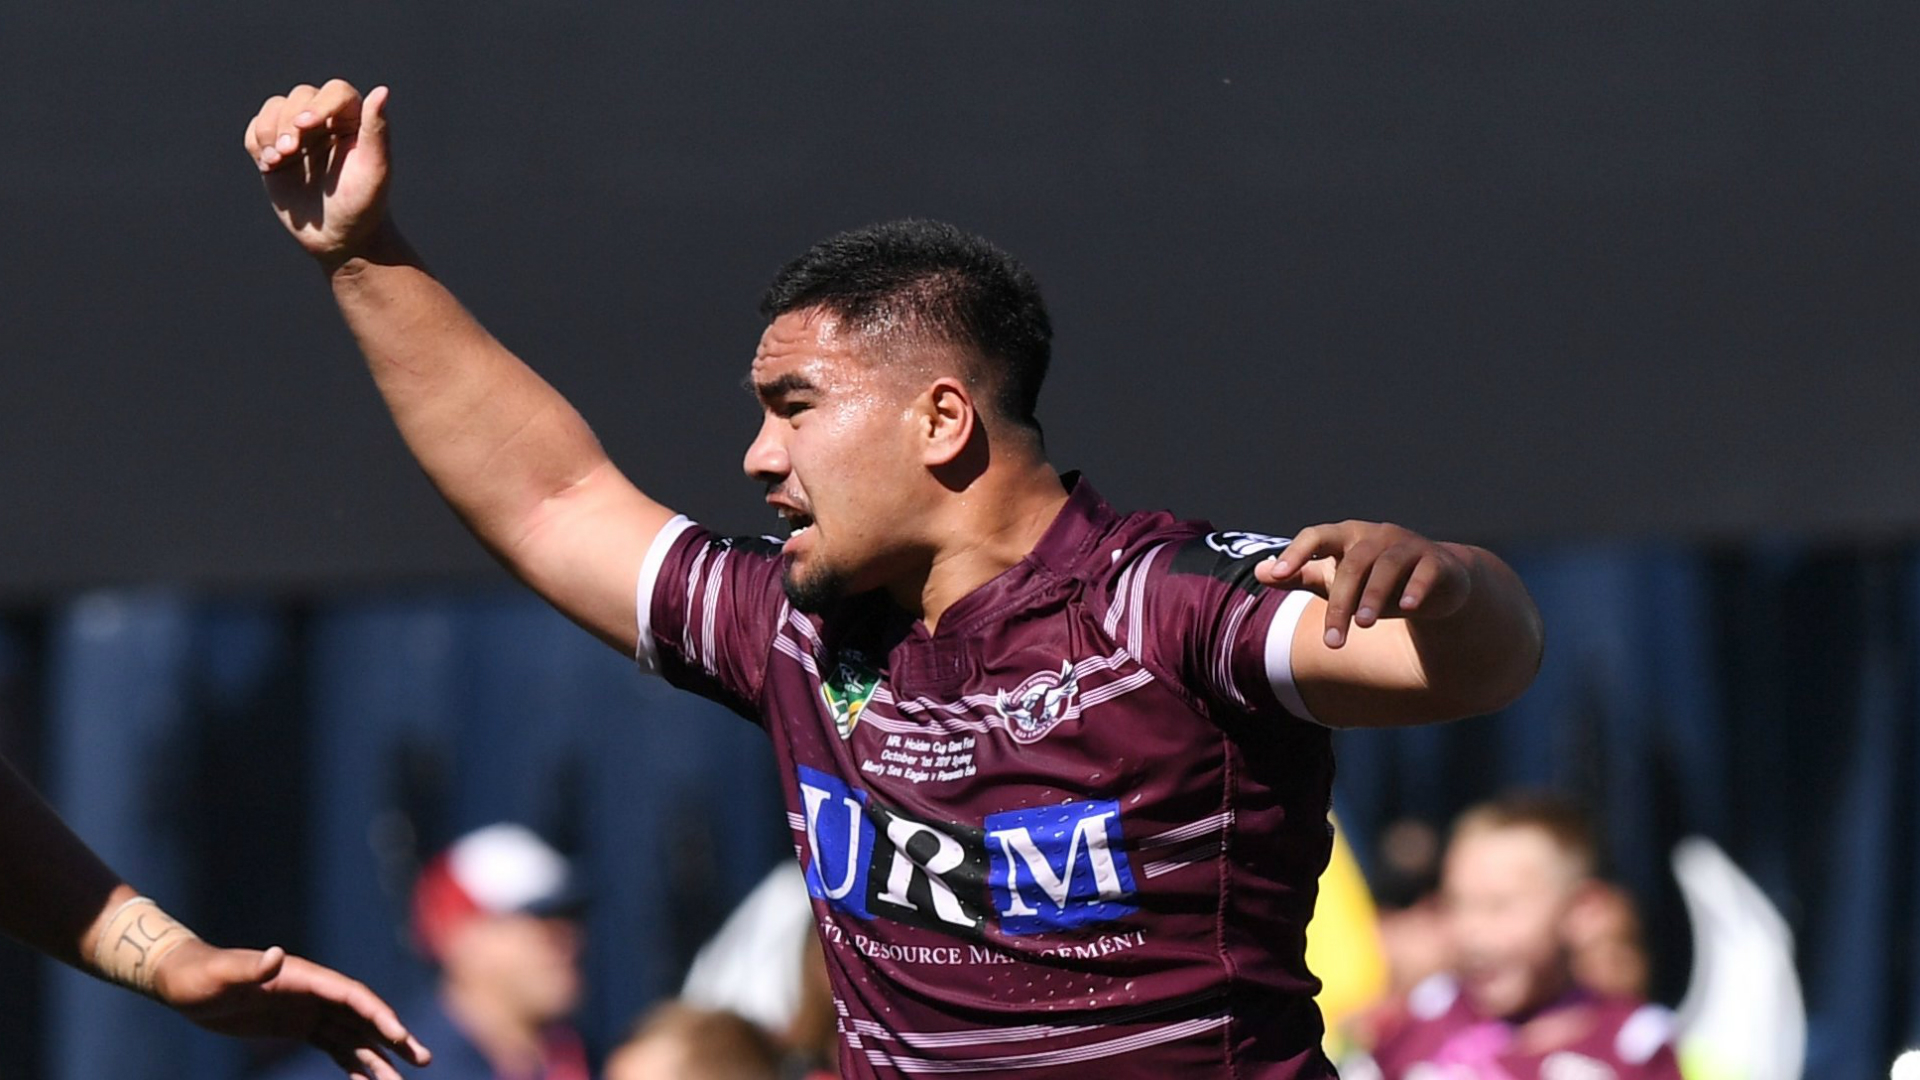 Manly Sea Eagles have confirmed the death of 20-year-old prop Keith Titmuss, who fell ill after a training session on Monday.